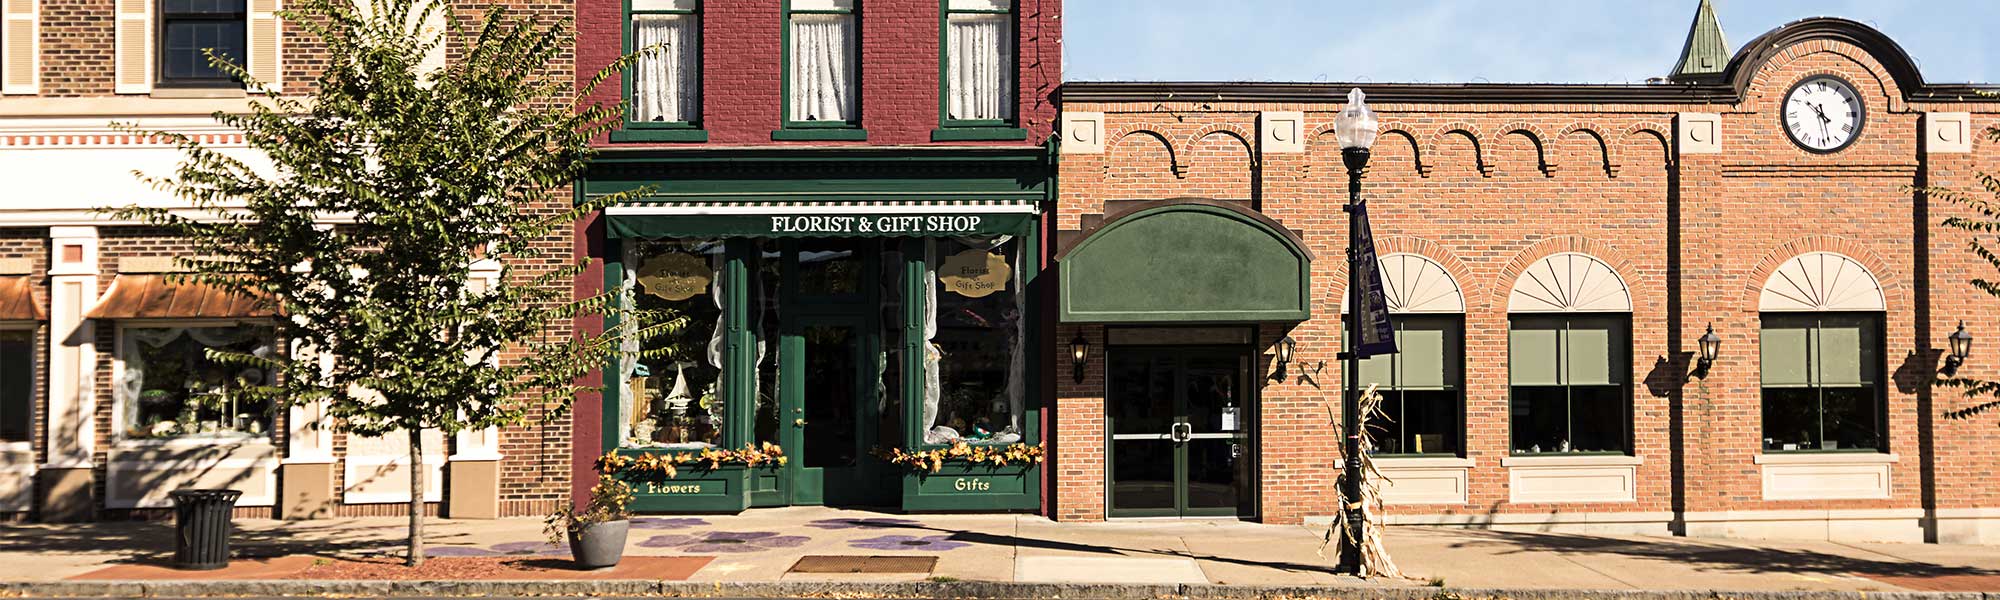 Street view of a Florist & Gift shop, next to two other buildings in a rural part of downtown.